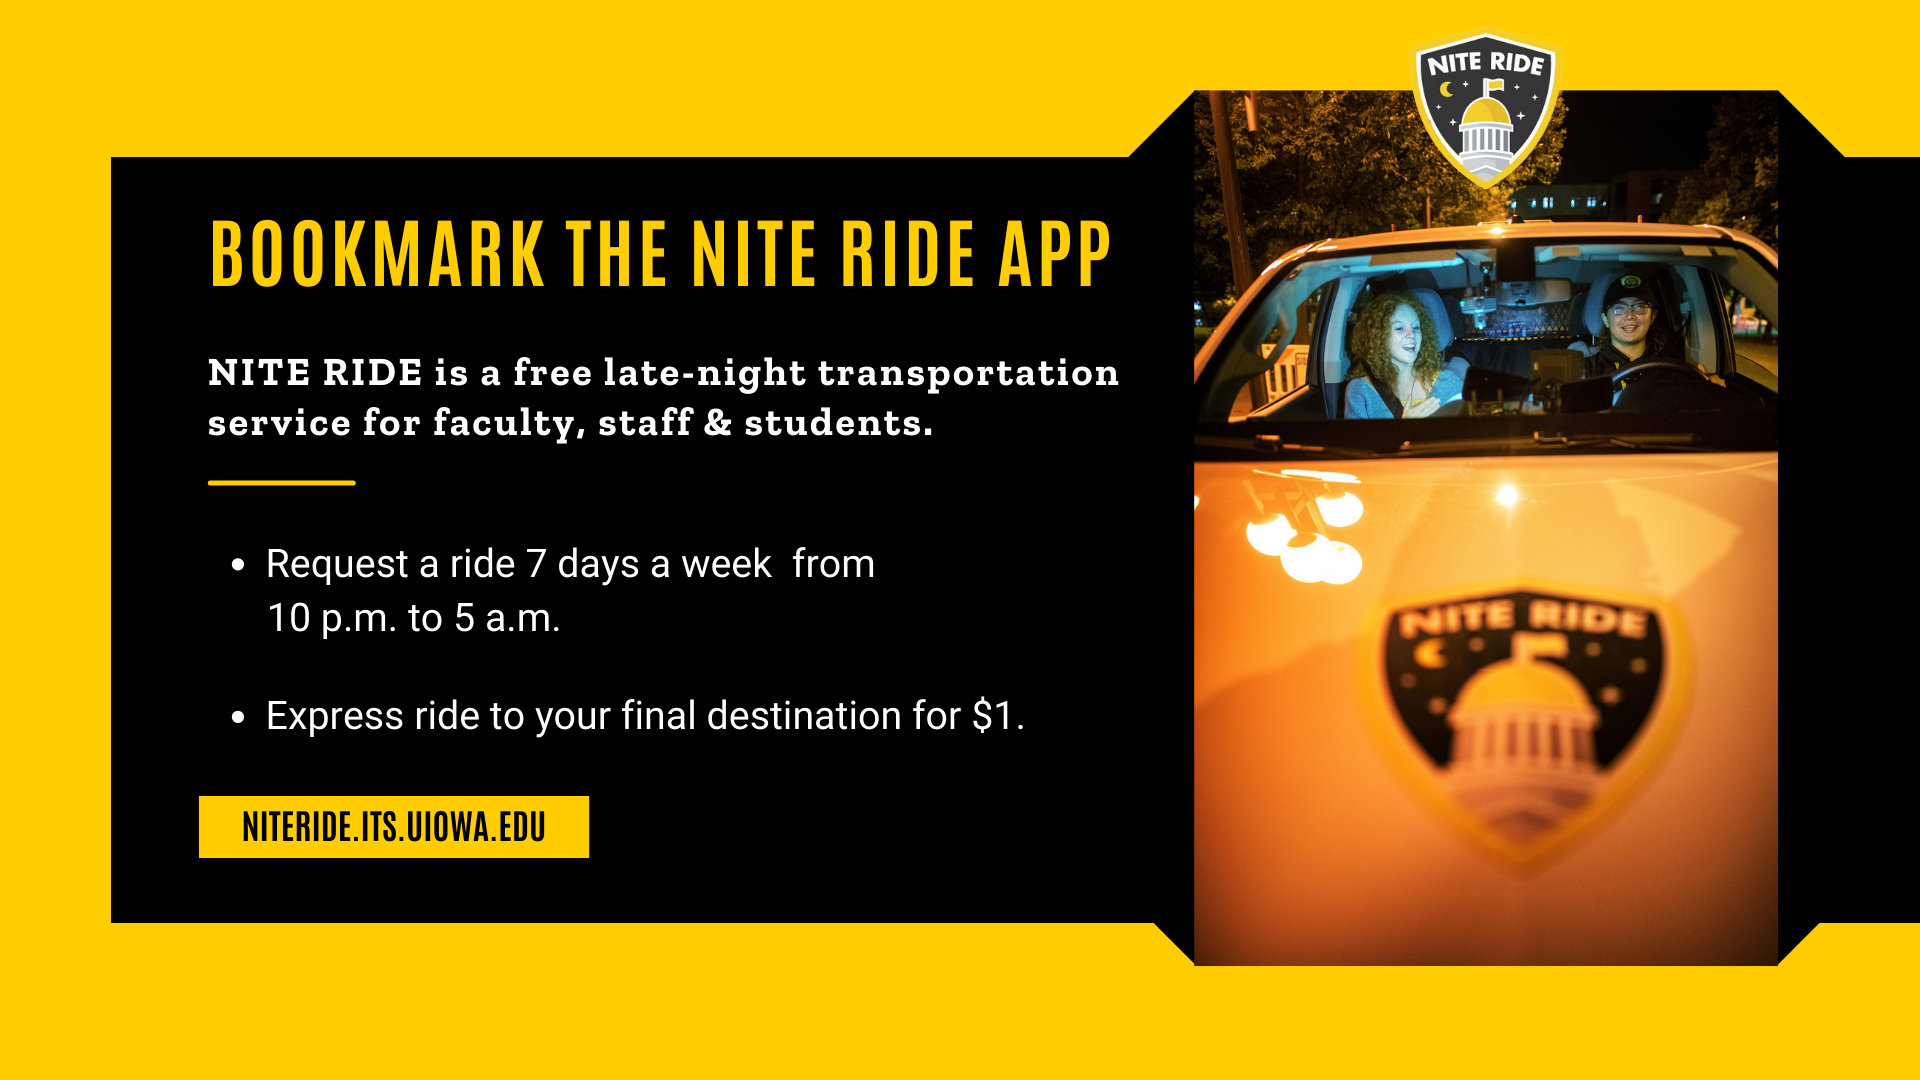 [ID] Gold text on the black background says,"Bookmark the NITE RIDE app; NITE RIDE is a free late-night transportation service for faculty, staff, & students. Request a ride 7 days a week from 10 p.m. to 5 a.m.; Express ride to your final destination for $1. NITERIDE.ITS.UIOWA.EDU